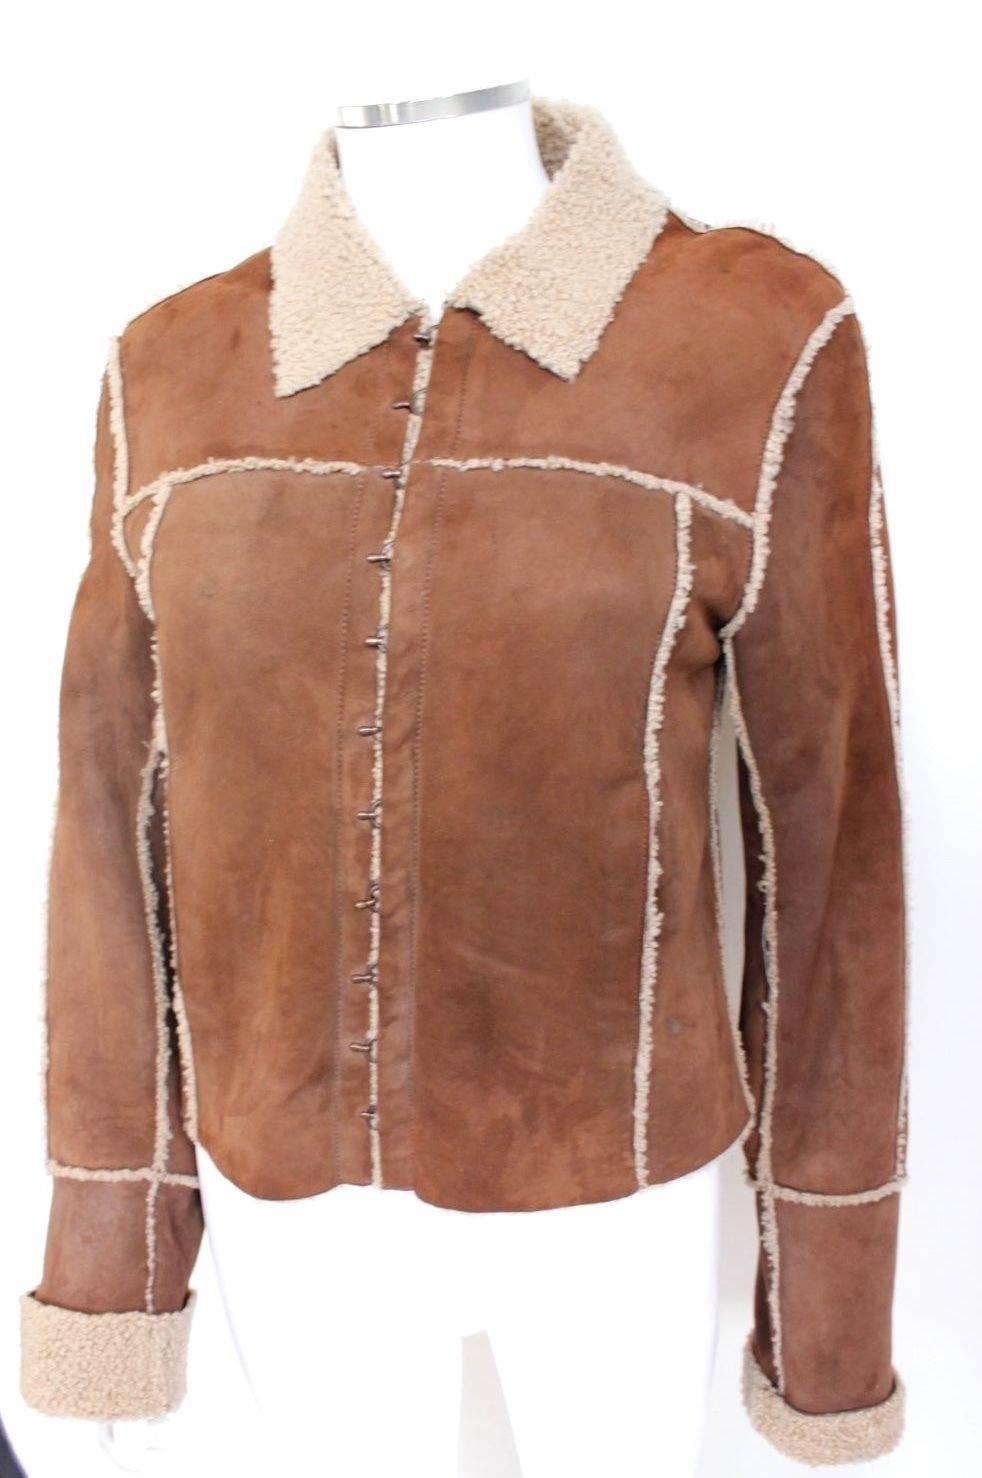 Balmain Brown Shearling Sheepskin Leather Jacket 38 uk 6 In Good Condition For Sale In London, GB